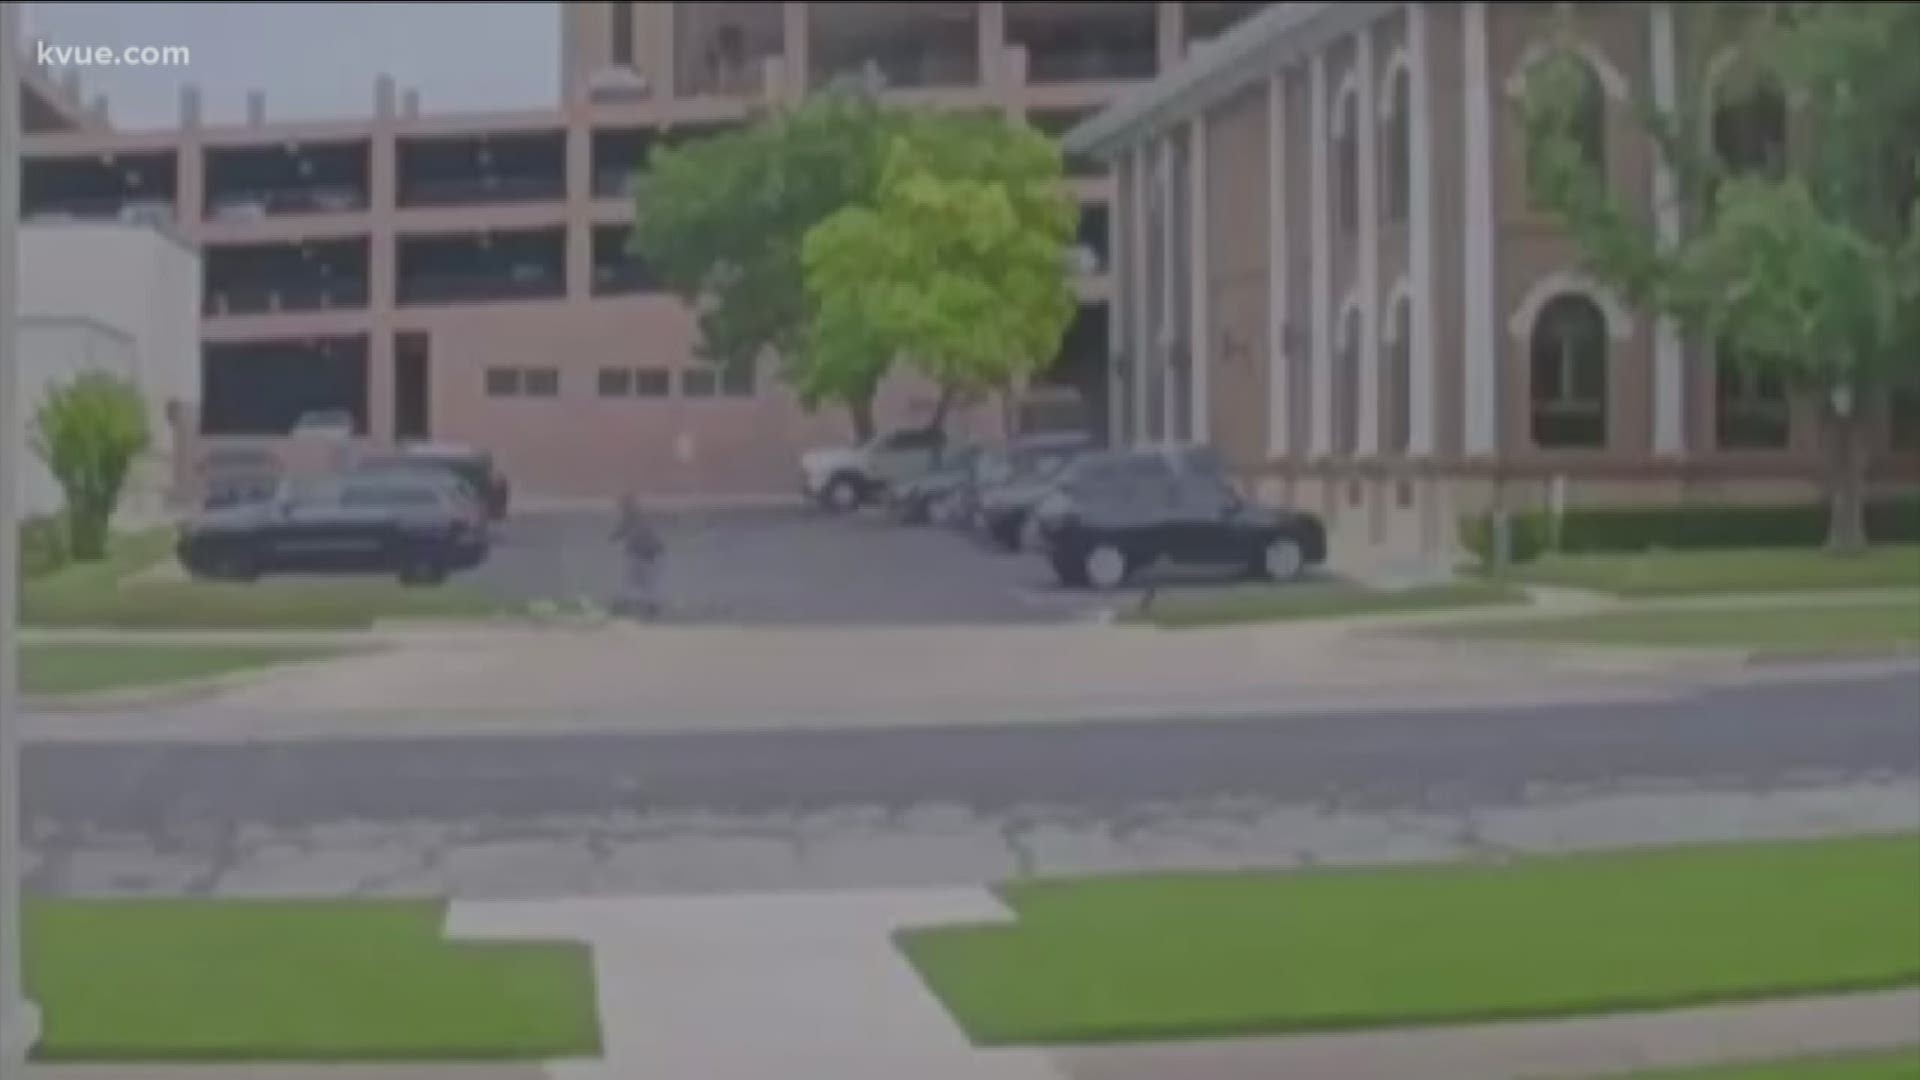 KVUE has the exclusive video of the attack.